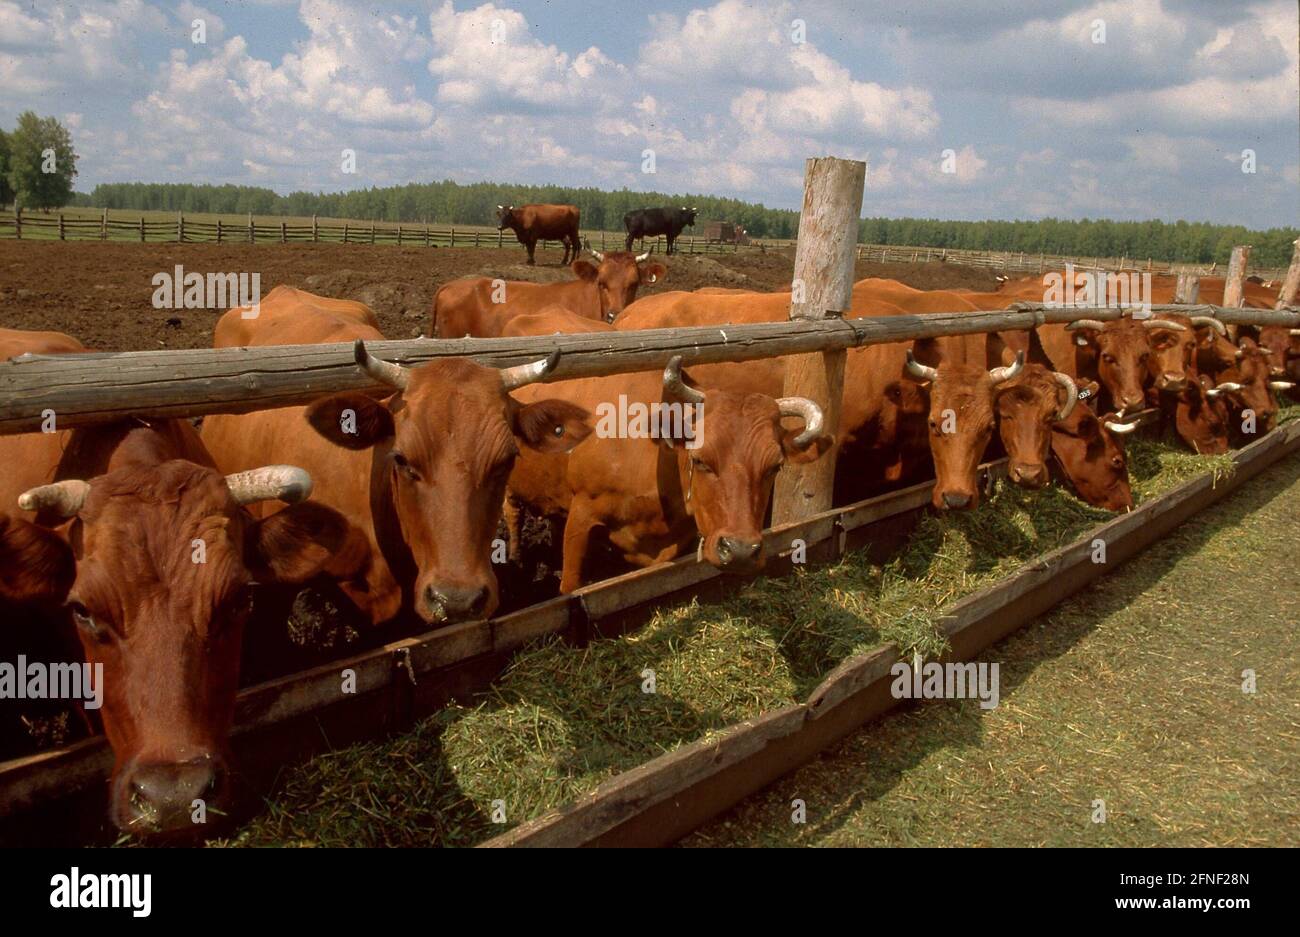 Cattle on a farm in the German rayon Asowo near the West Siberian Omsk. In Siberia, settlements of Russian Germans (Sibiri Germans) were established from 1881 onwards. [automated translation] Stock Photo